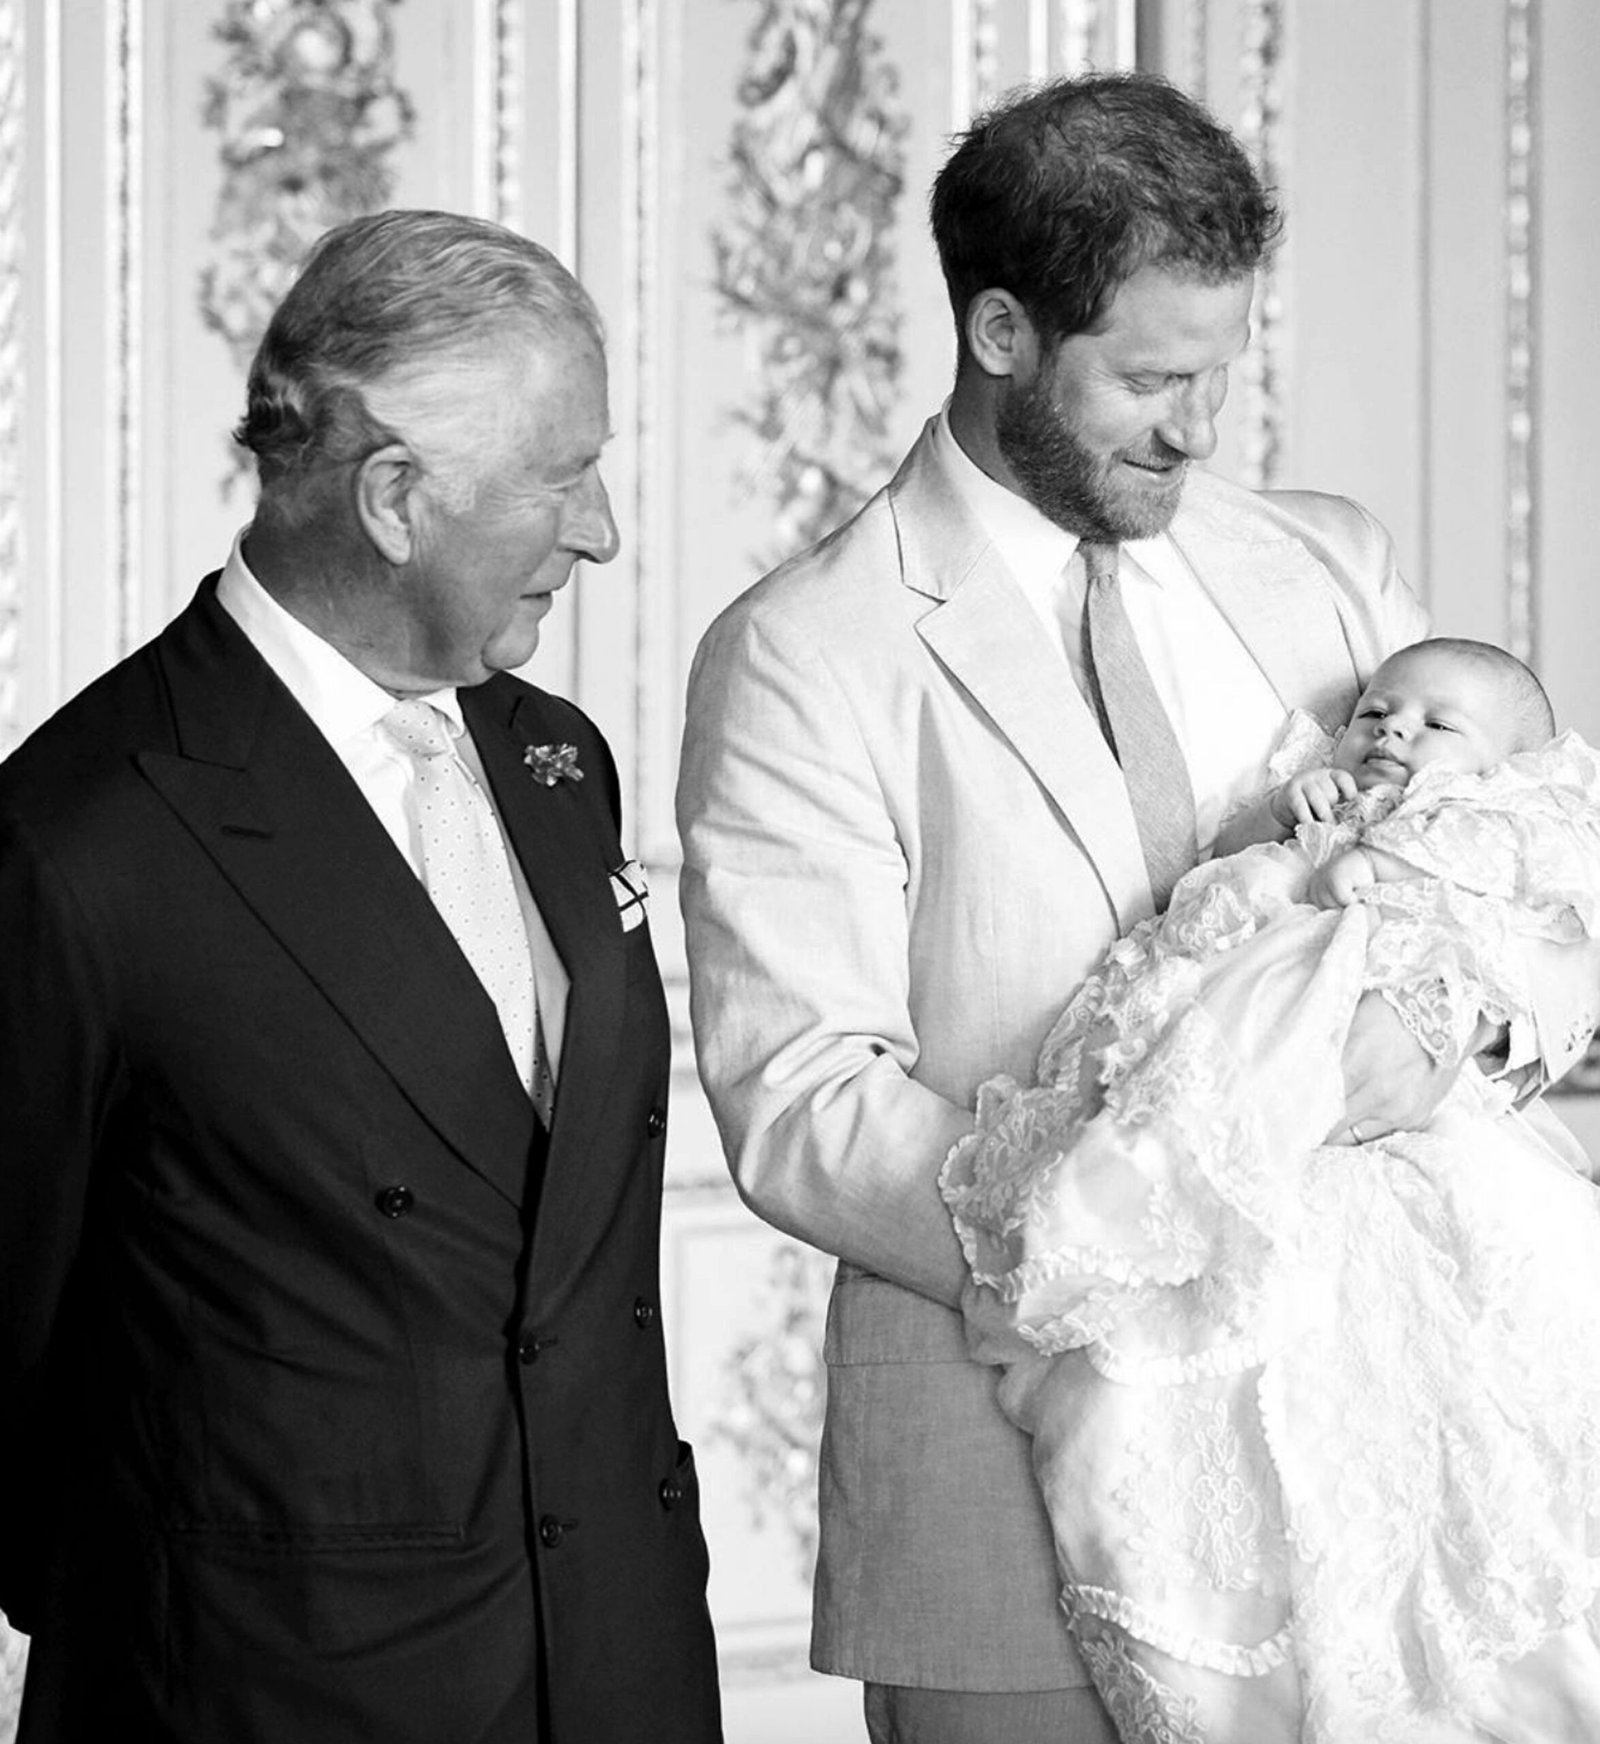 Meghan and Harry are furious over the decision: Prince Charles will make sure his nephew Archie never becomes a prince